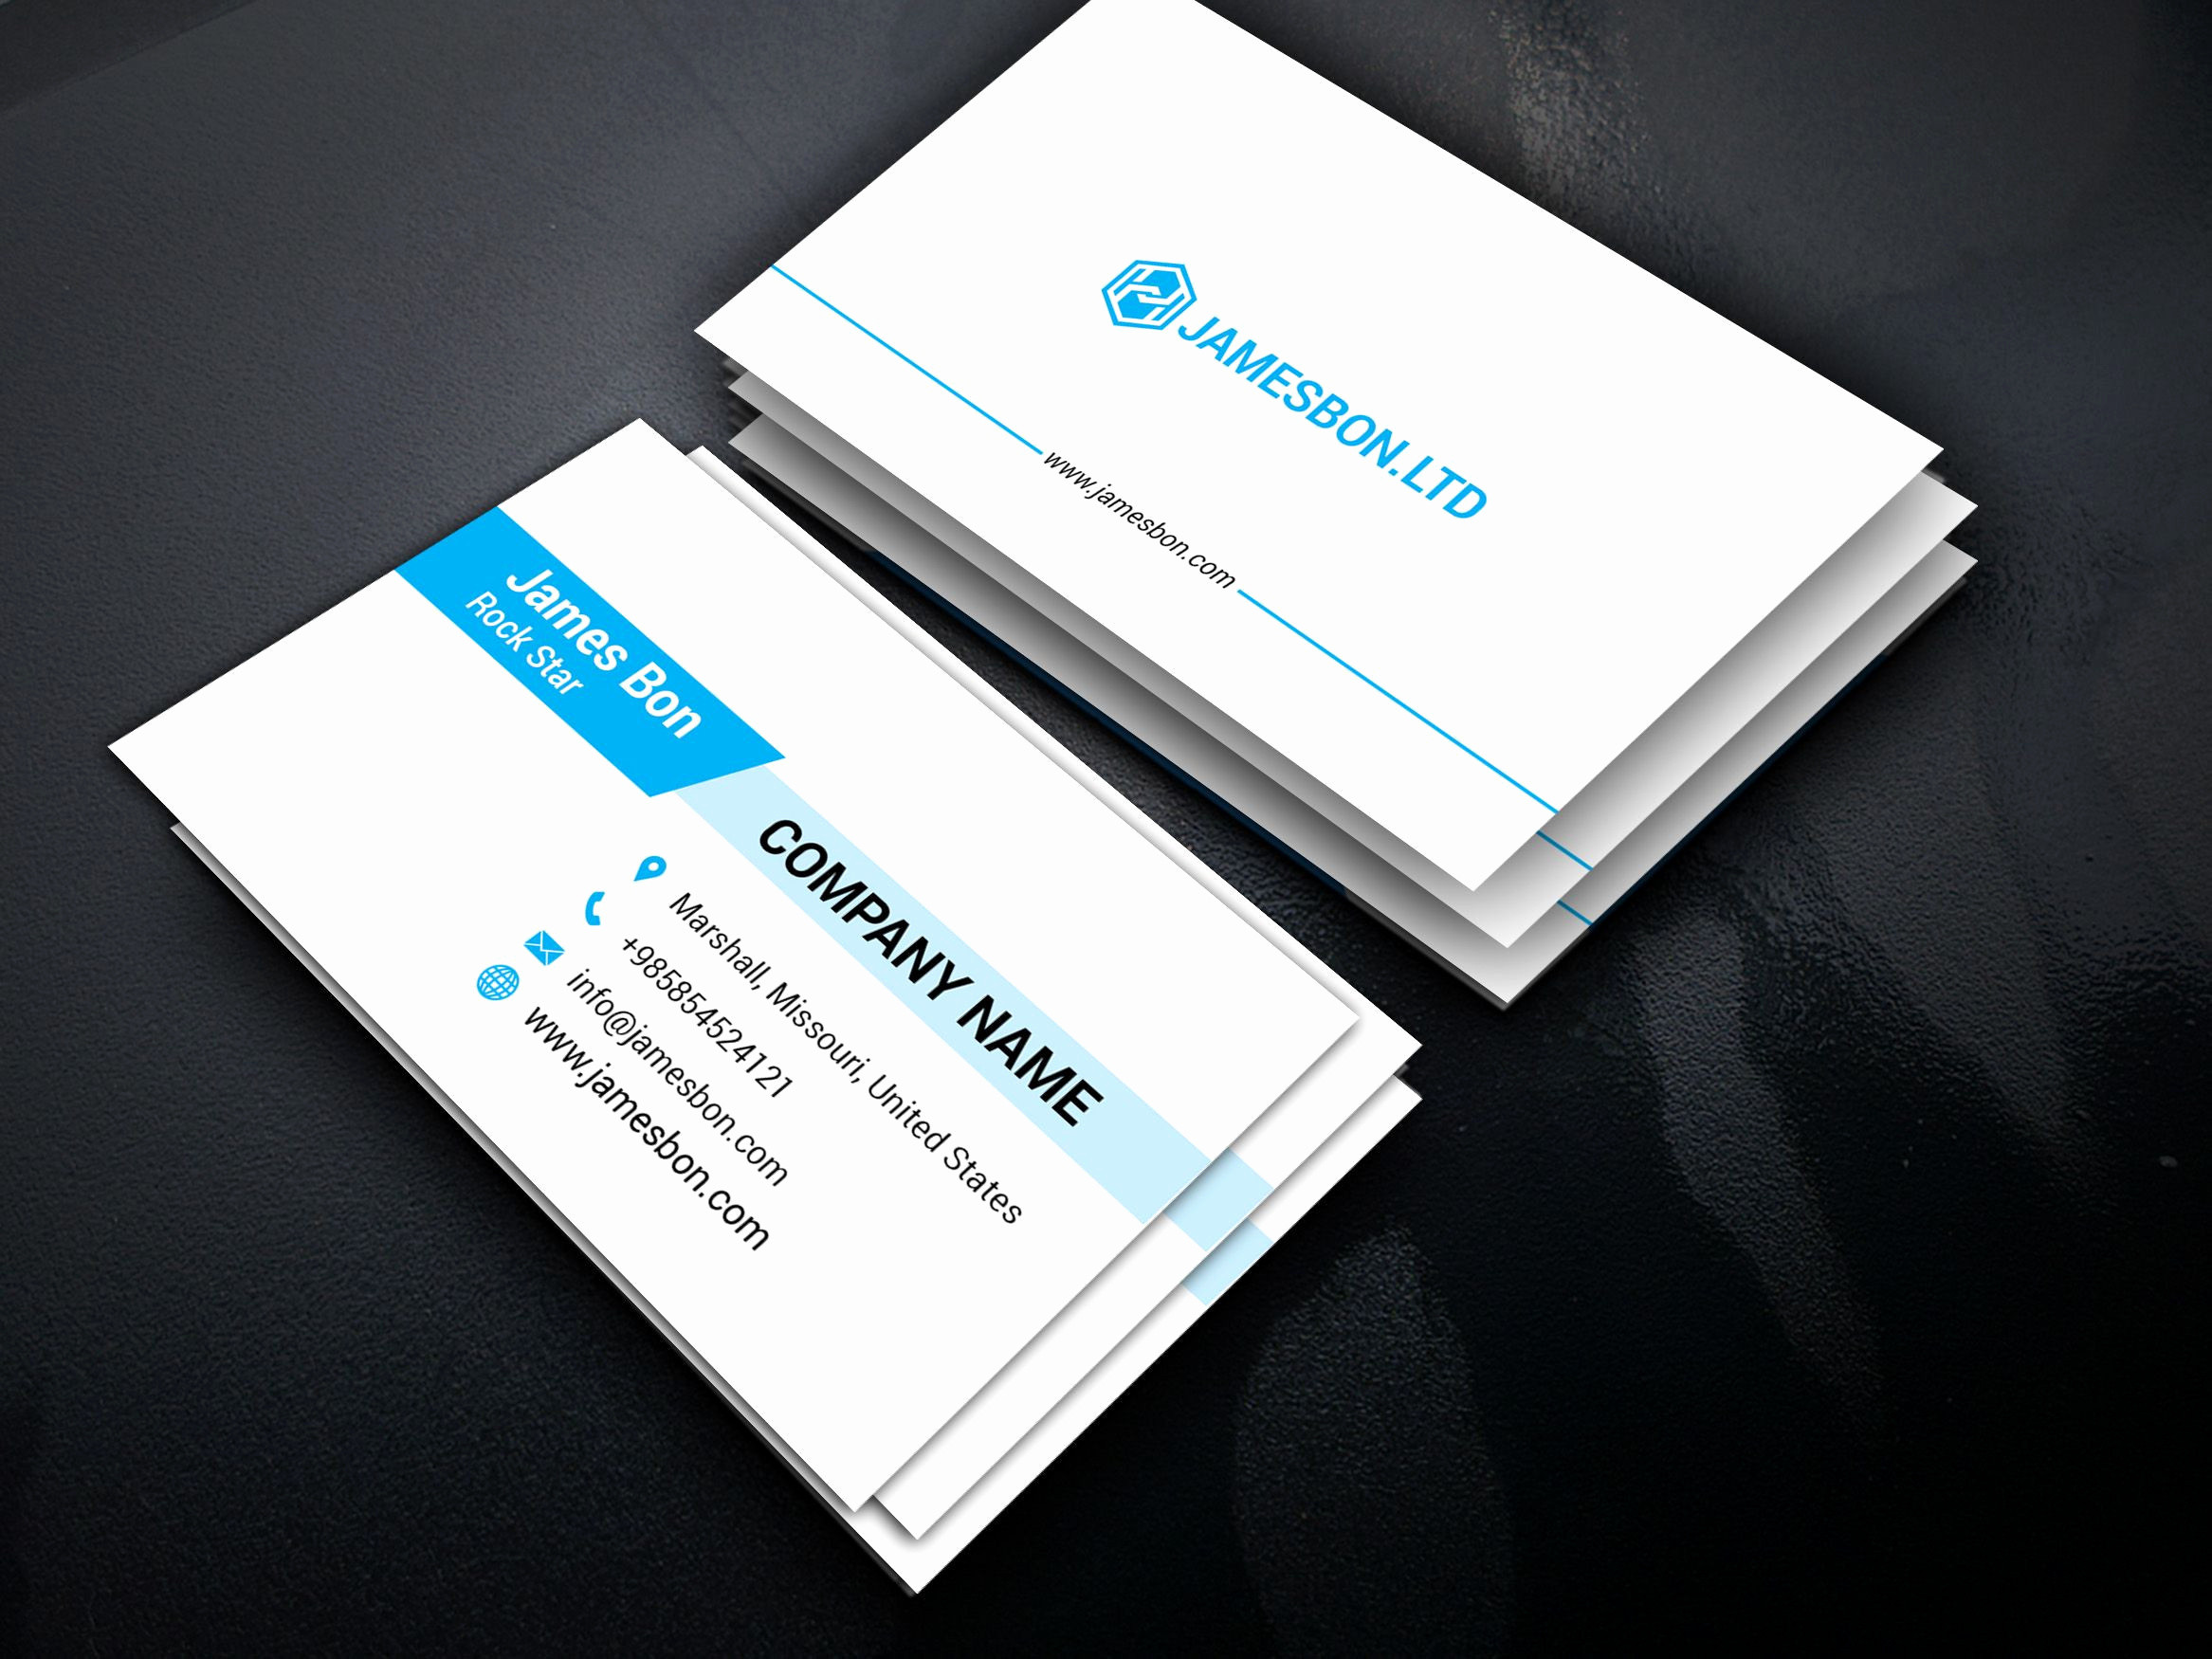 tutoring business cards collections of staples design business cards elegant business card portfolio unique of tutoring business cards